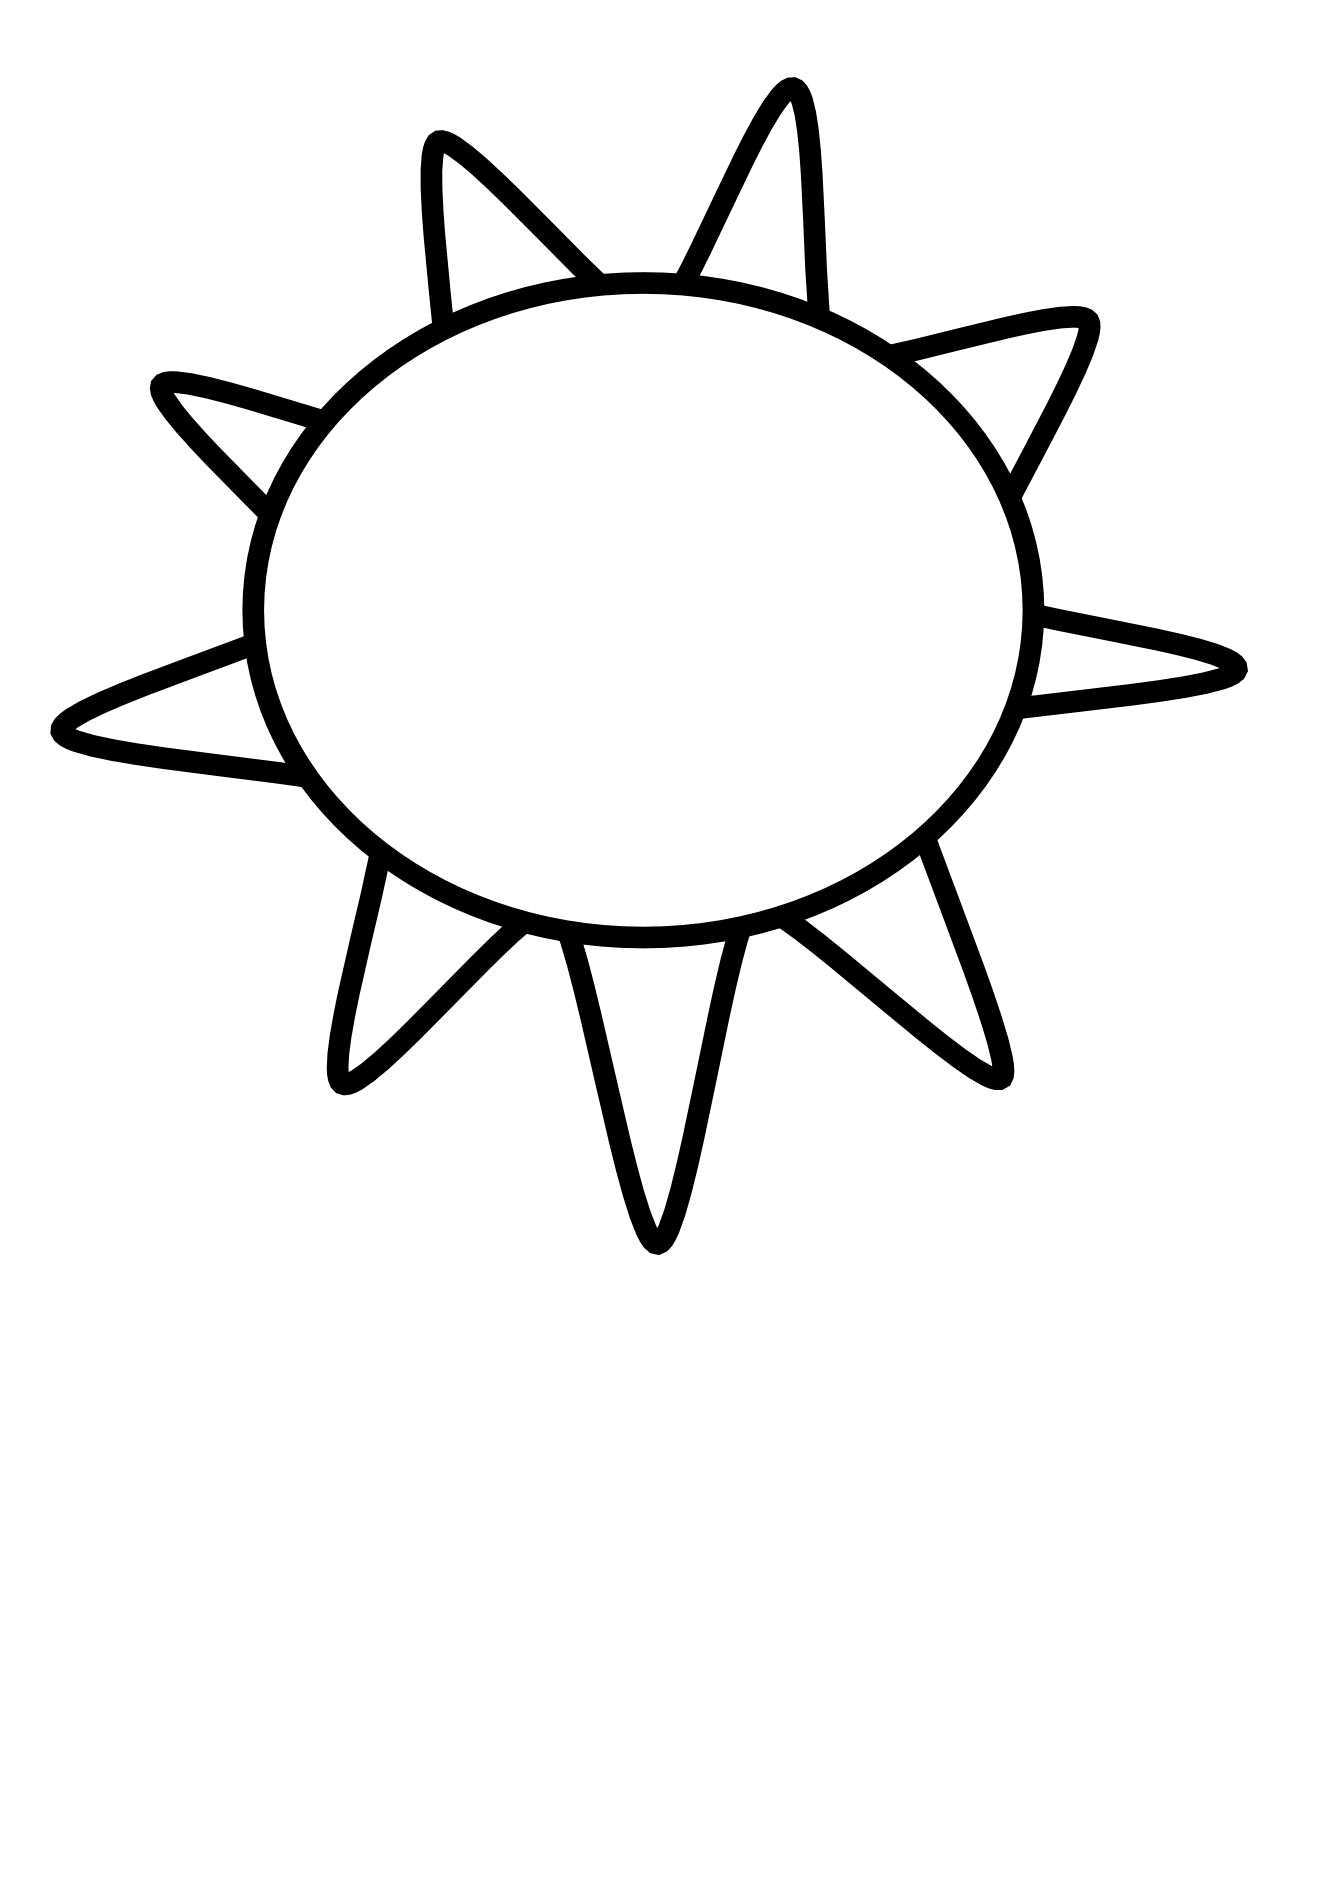 Half Sun Clipart Black And White   Clipart Panda   Free Clipart Images